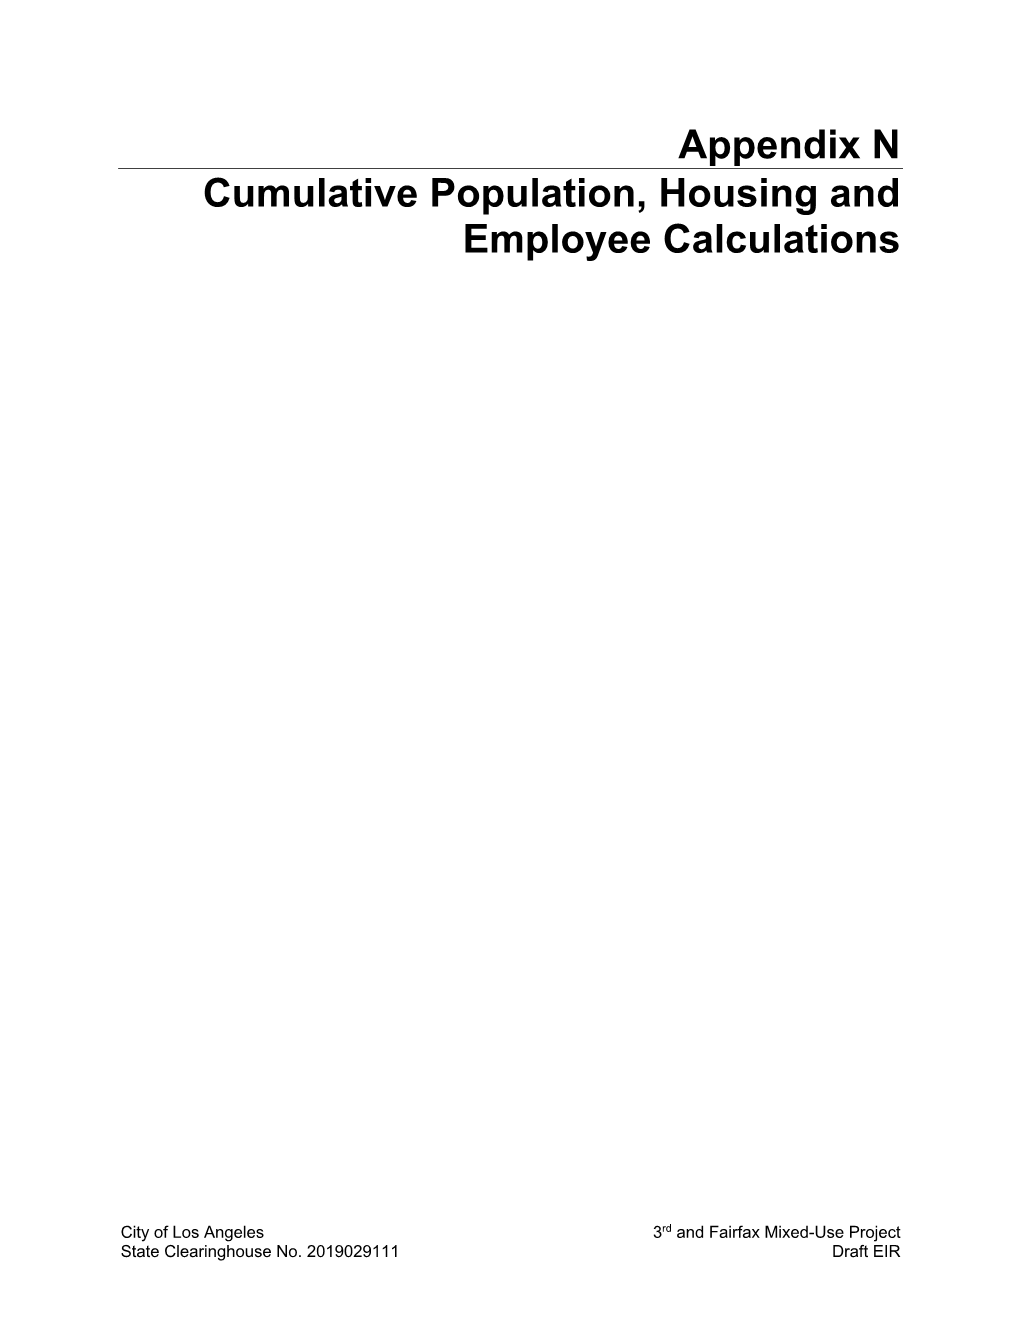 Appendix N Cumulative Population, Housing and Employee Calculations